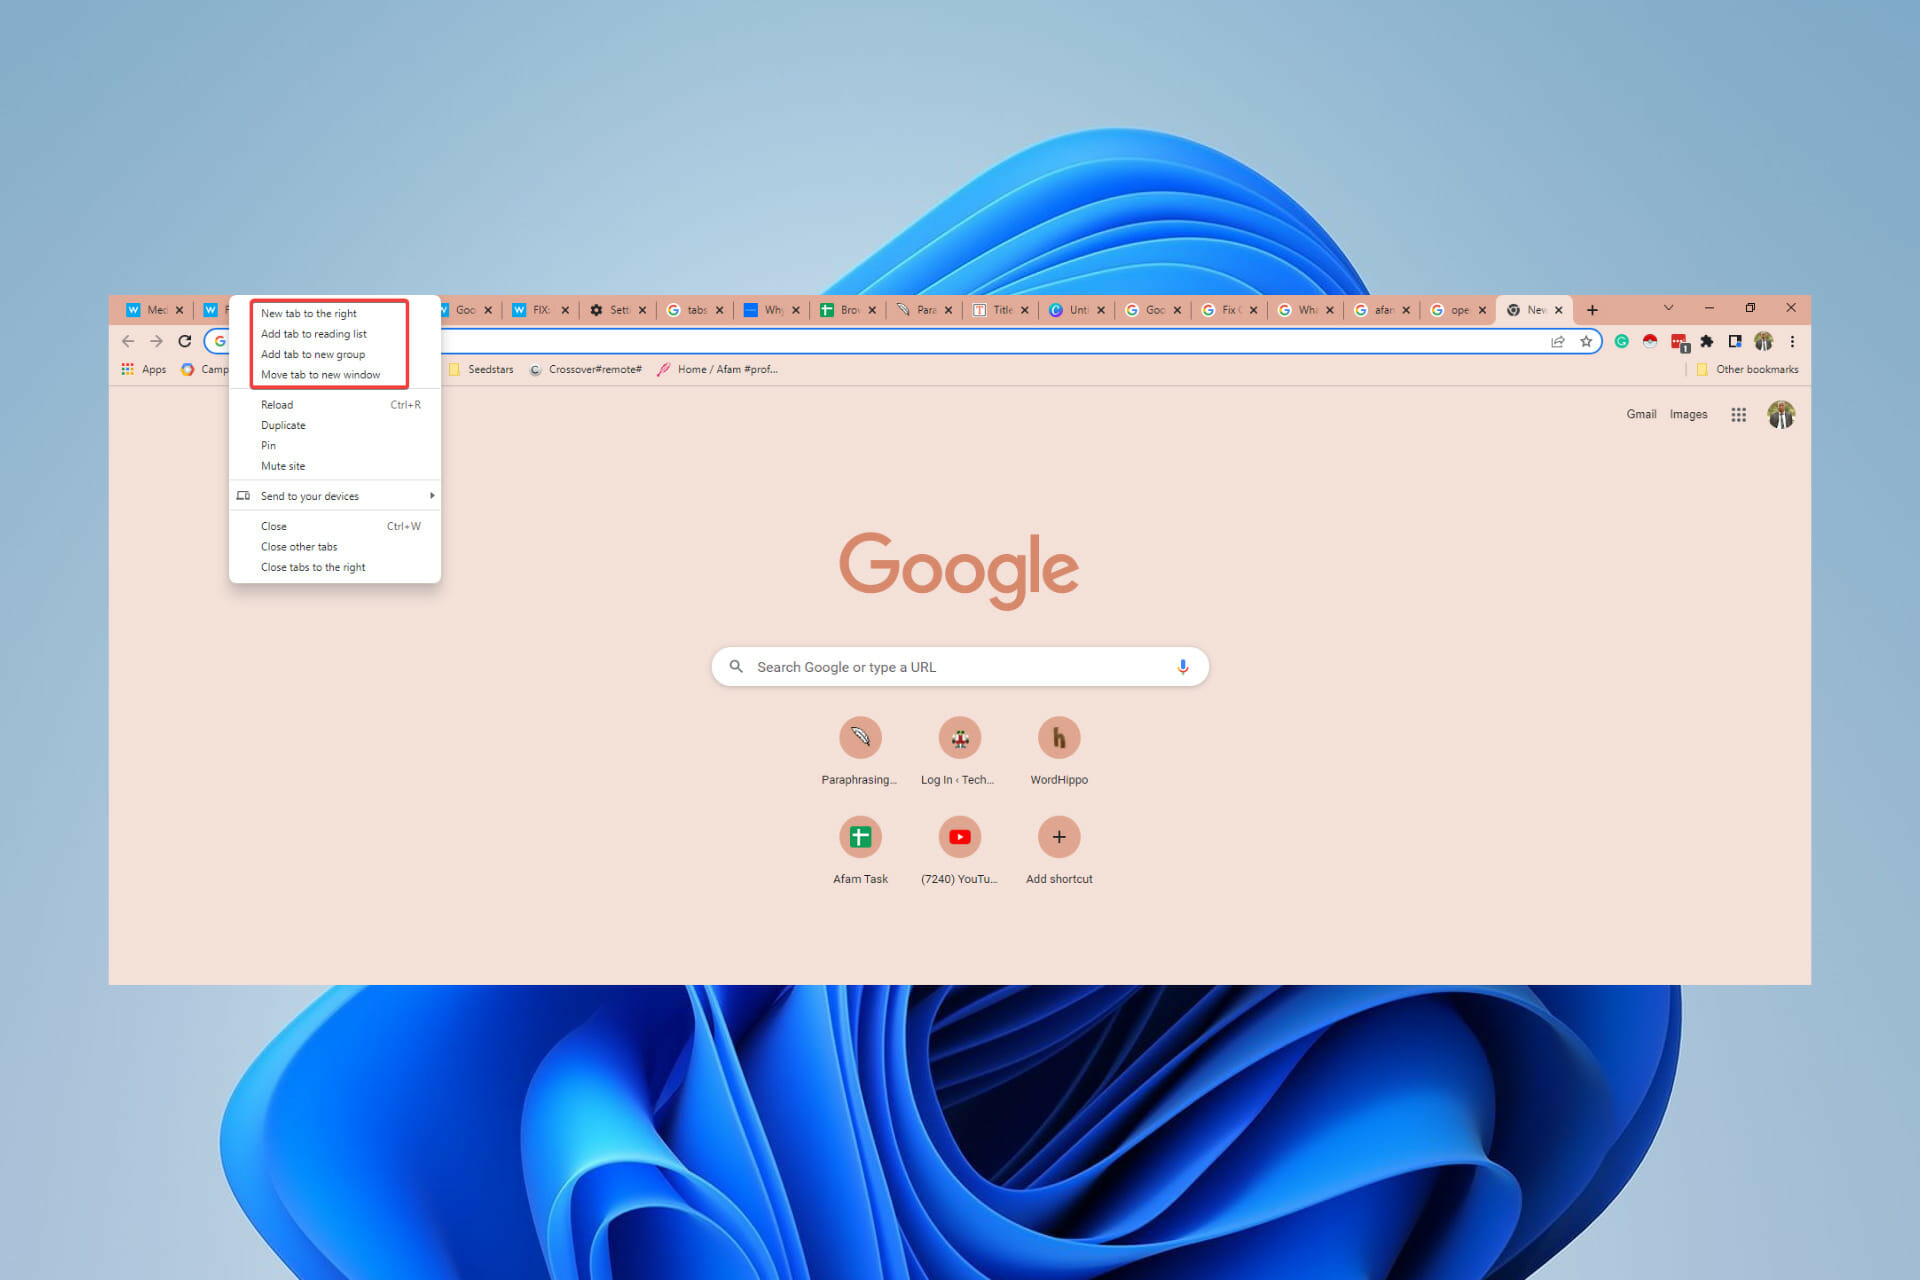 New Tabs Keep Opening in Chrome? Try These Fixes